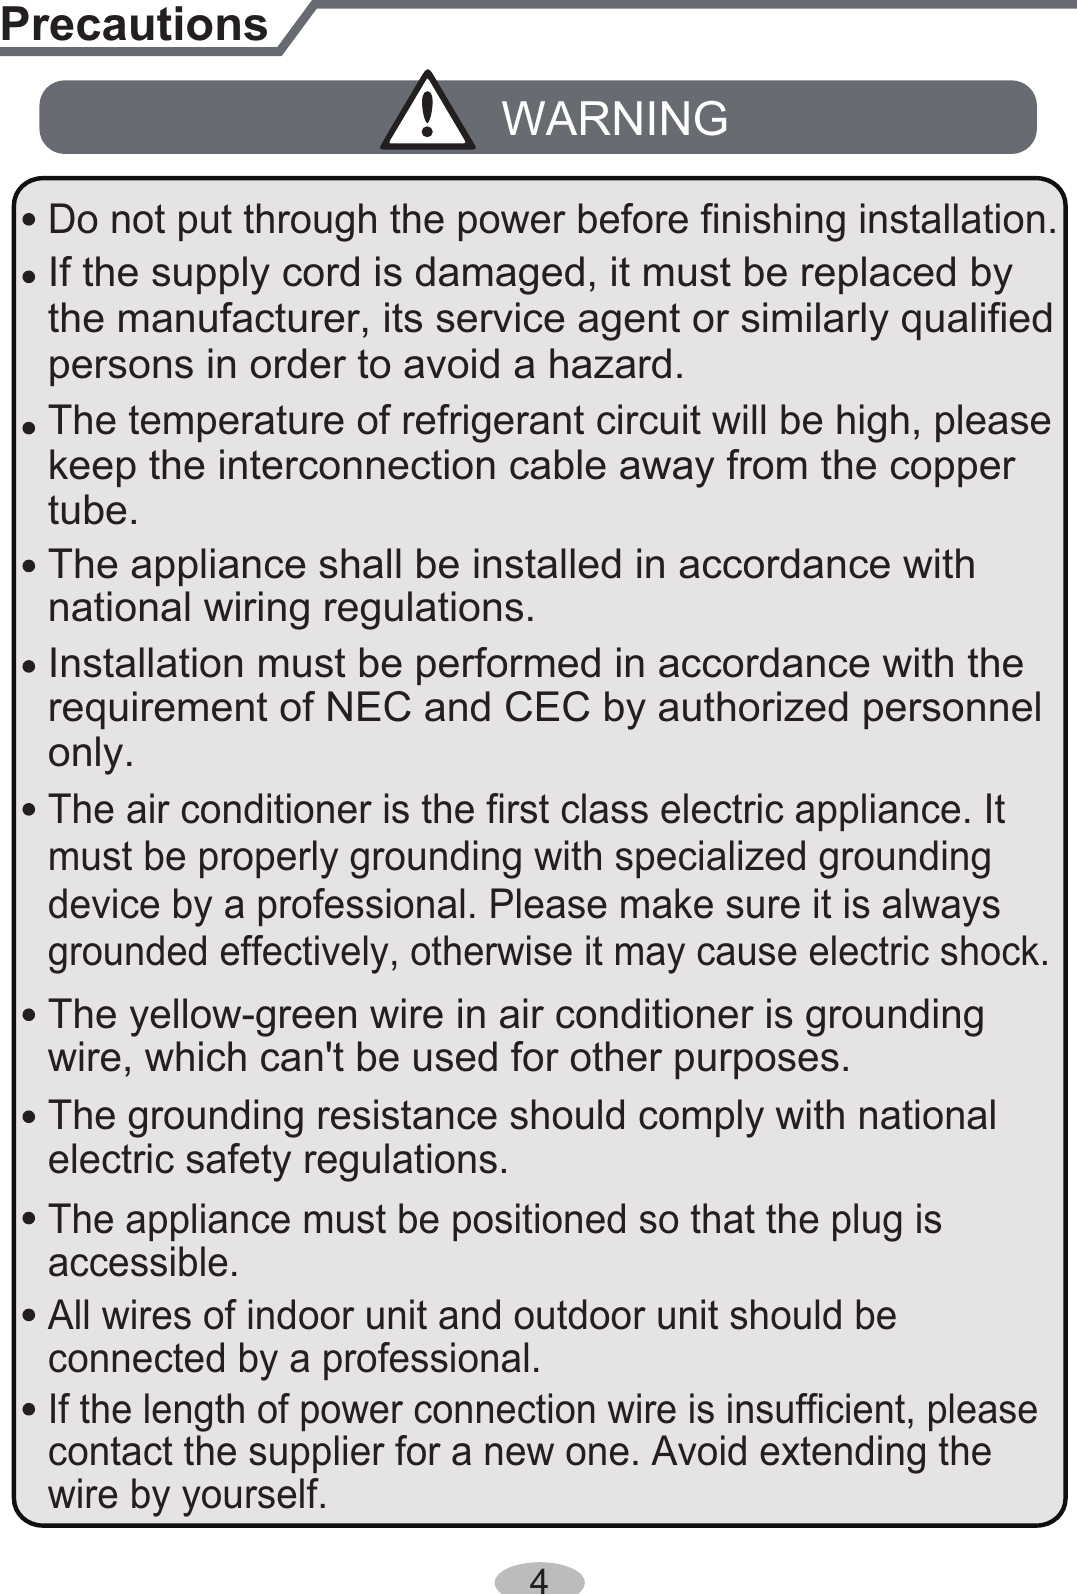 Installation must be performed in accordance with the persons in order to avoid a hazard.must be properly grounding with specialized grounding device by a professional. Please make sure it is always grounded effectively, otherwise it may cause electric shock.The appliance must be positioned so that the plug is accessible.If the length of power connection wire is insufficient, please contact the supplier for a new one. Avoid extending the wire by yourself.All wires of indoor unit and outdoor unit should be connected by a professional. national wiring regulations.requirement of NEC and CEC by authorized personnel only.PrecautionsWARNINGwire, which can&apos;t be used for other purposes.The grounding resistance should comply with national electric safety regulations.The air conditioner is the first class electric appliance. It keep the interconnection cable away from the copper tube.The temperature of refrigerant circuit will be high, please the manufacturer, its service agent or similarly qualified If the supply cord is damaged, it must be replaced by The yellow-green wire in air conditioner is grounding The appliance shall be installed in accordance with Do not put through the power before finishing installation.4